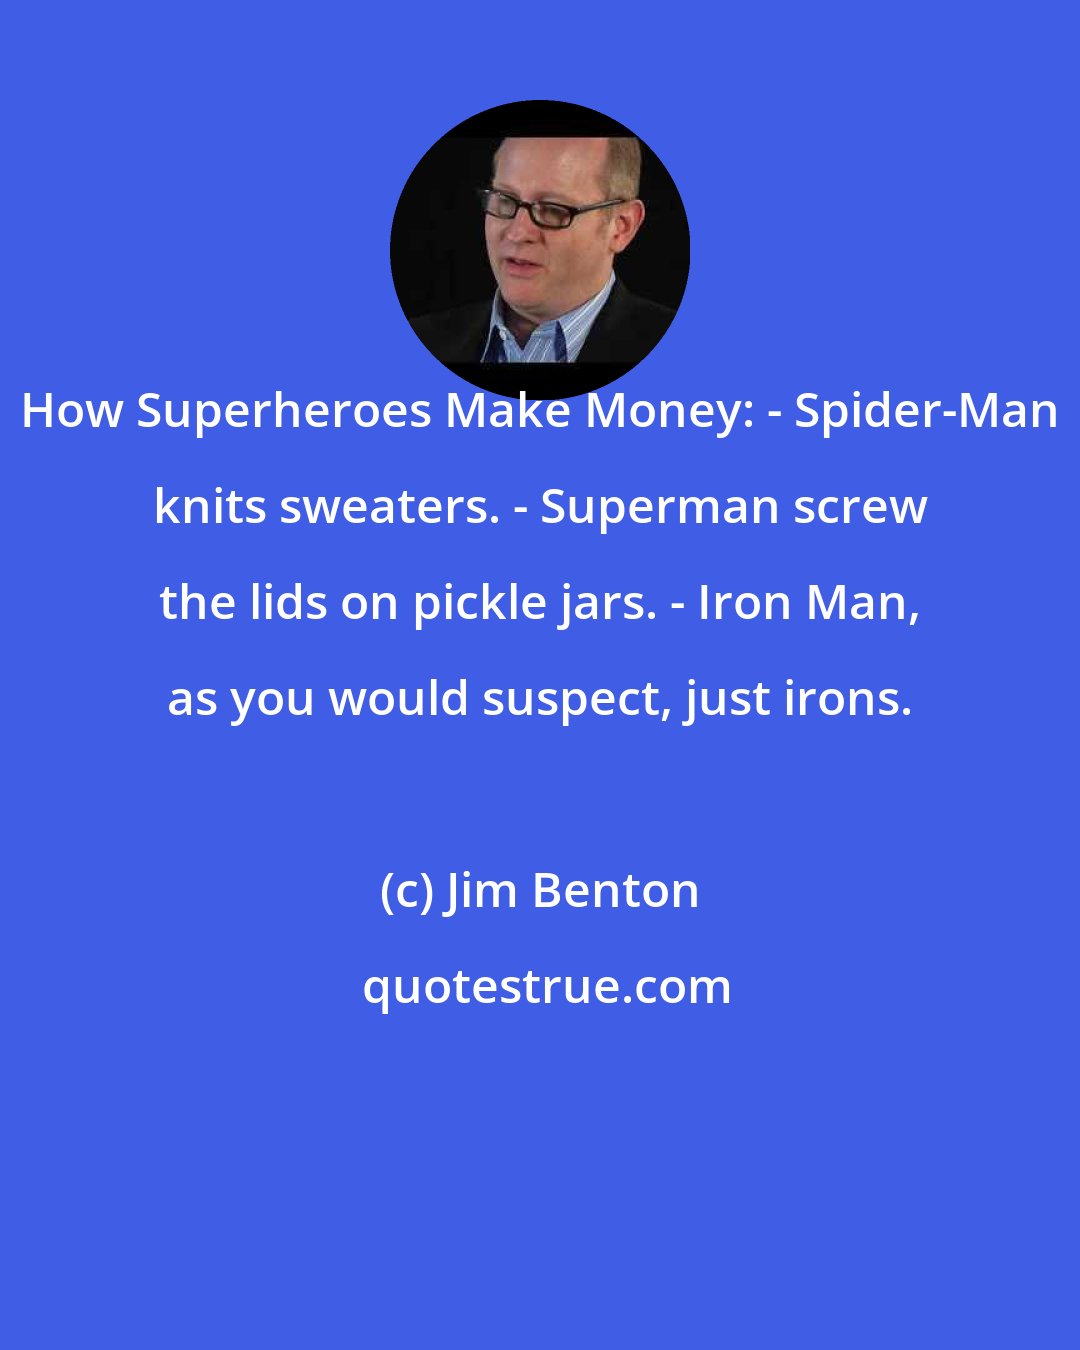 Jim Benton: How Superheroes Make Money: - Spider-Man knits sweaters. - Superman screw the lids on pickle jars. - Iron Man, as you would suspect, just irons.